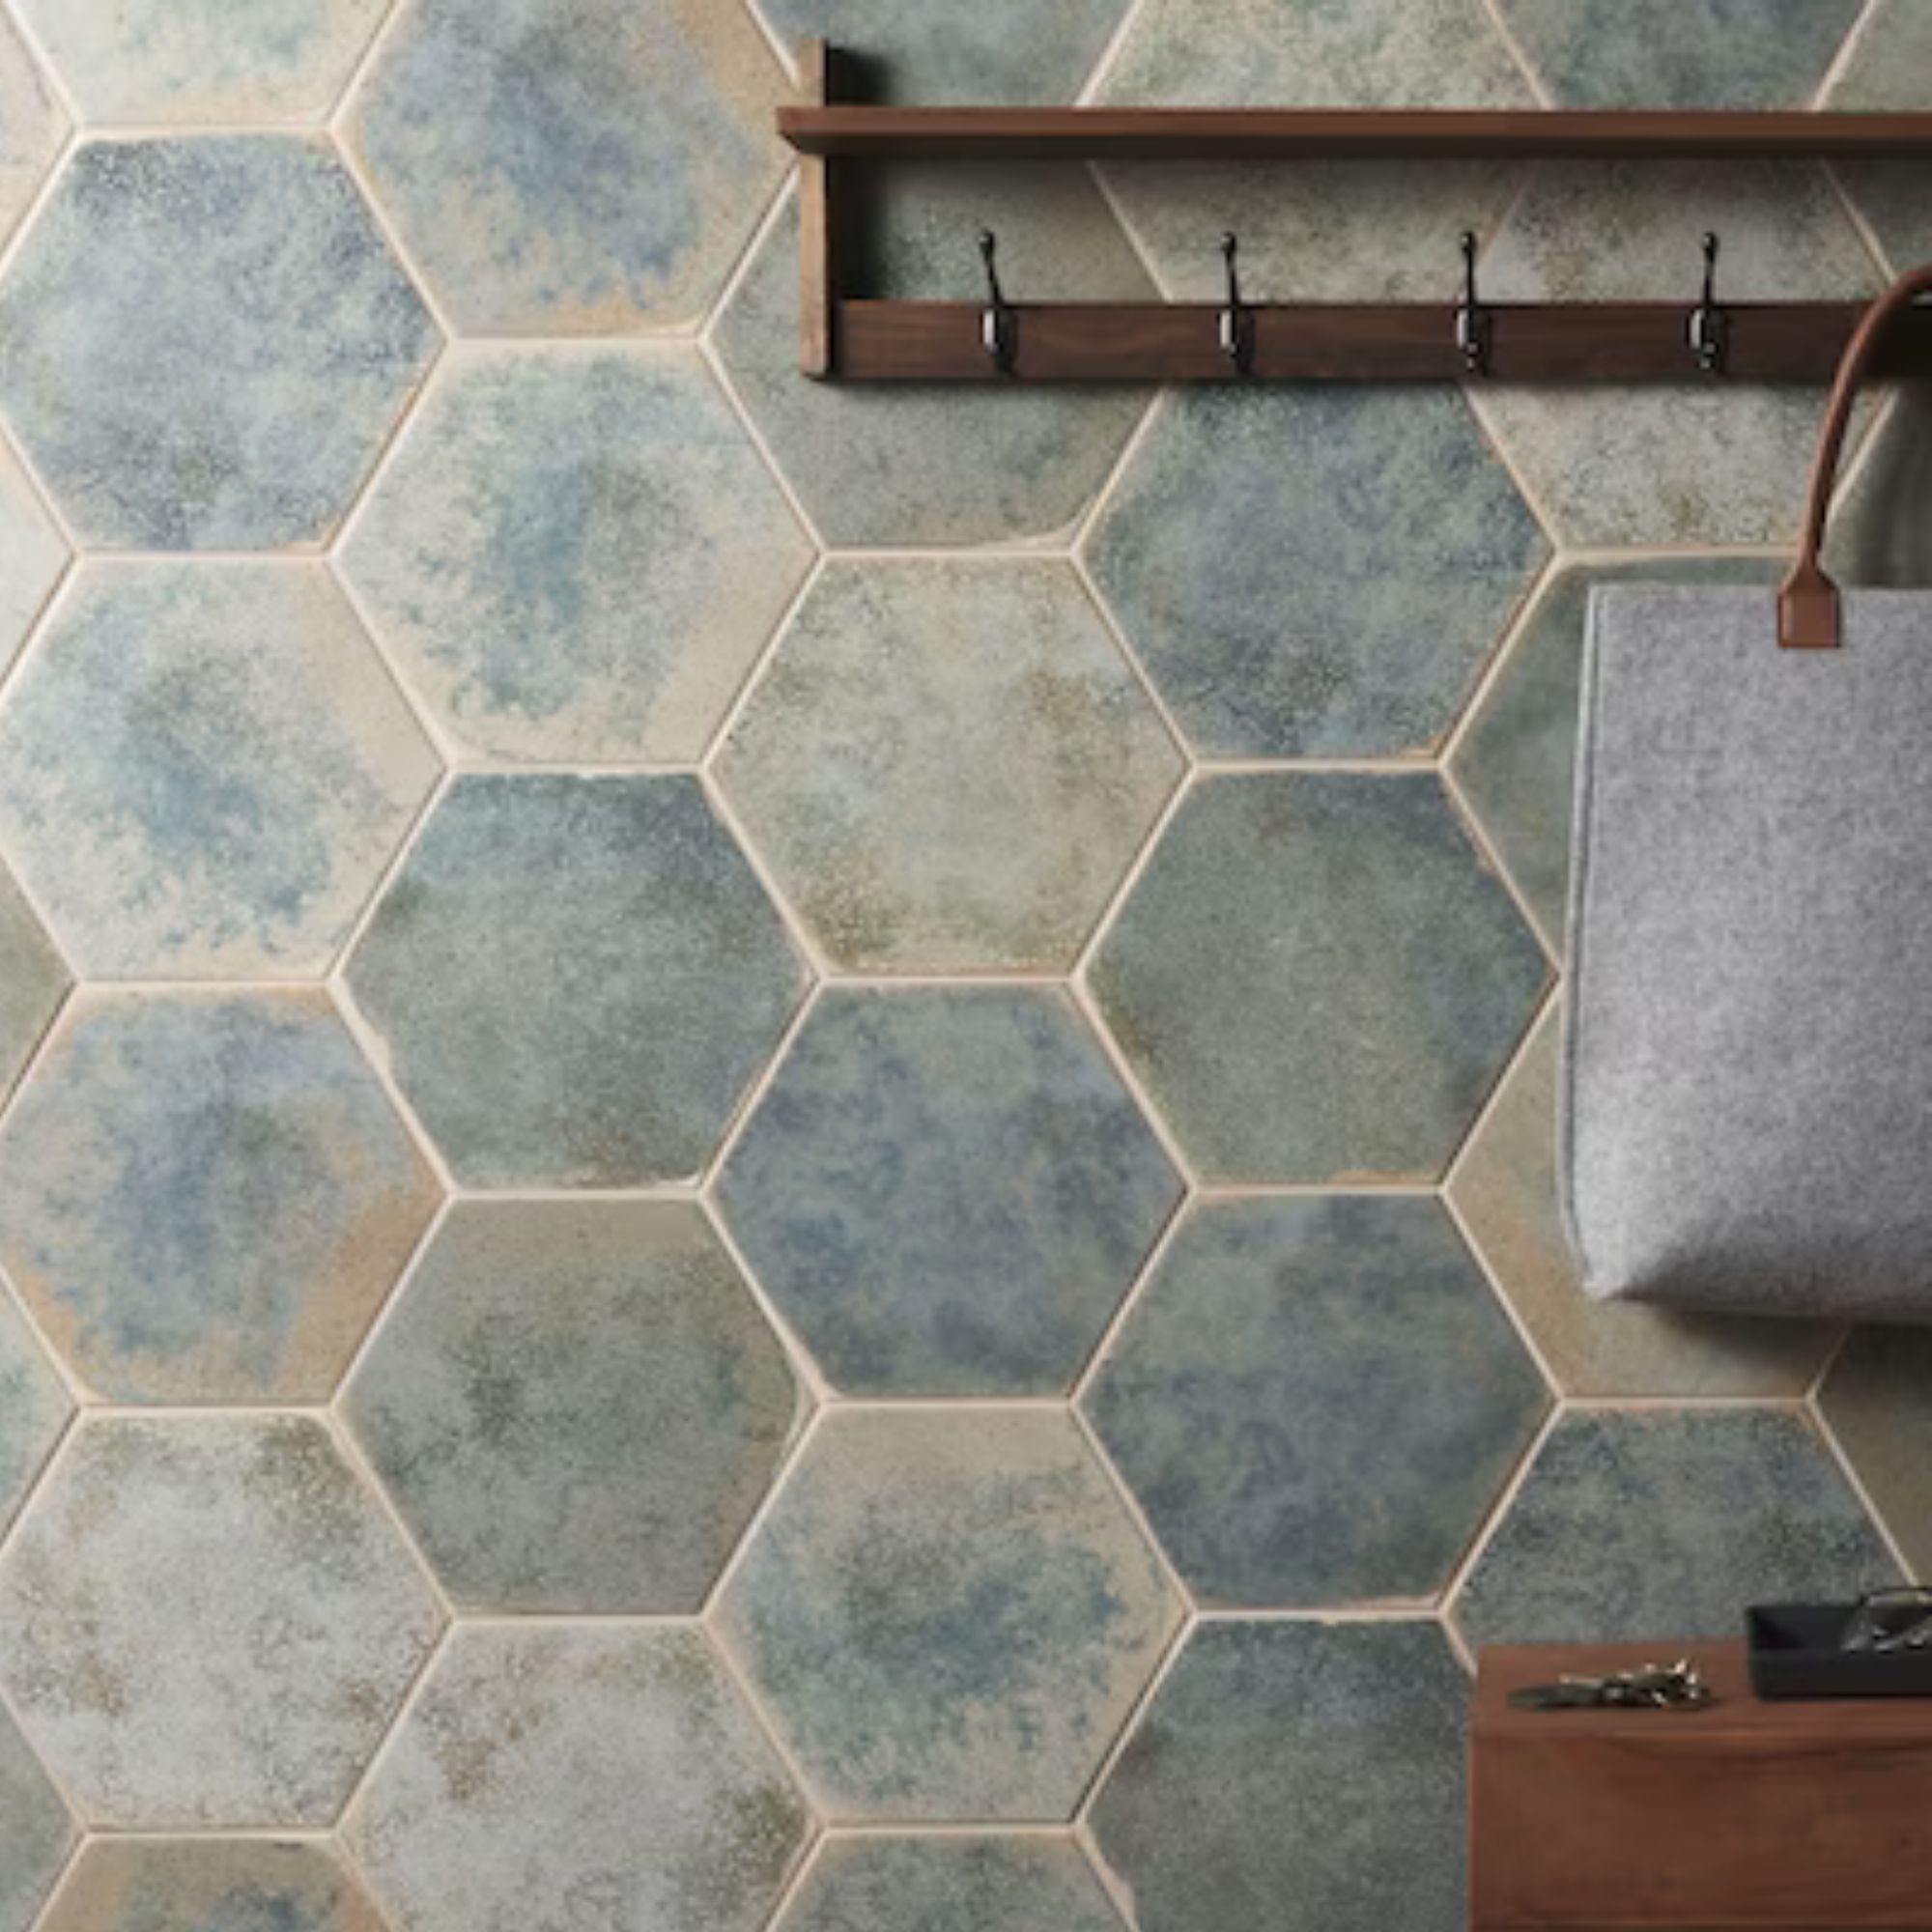 Blue, green and gray tiles in hexagonal shapes